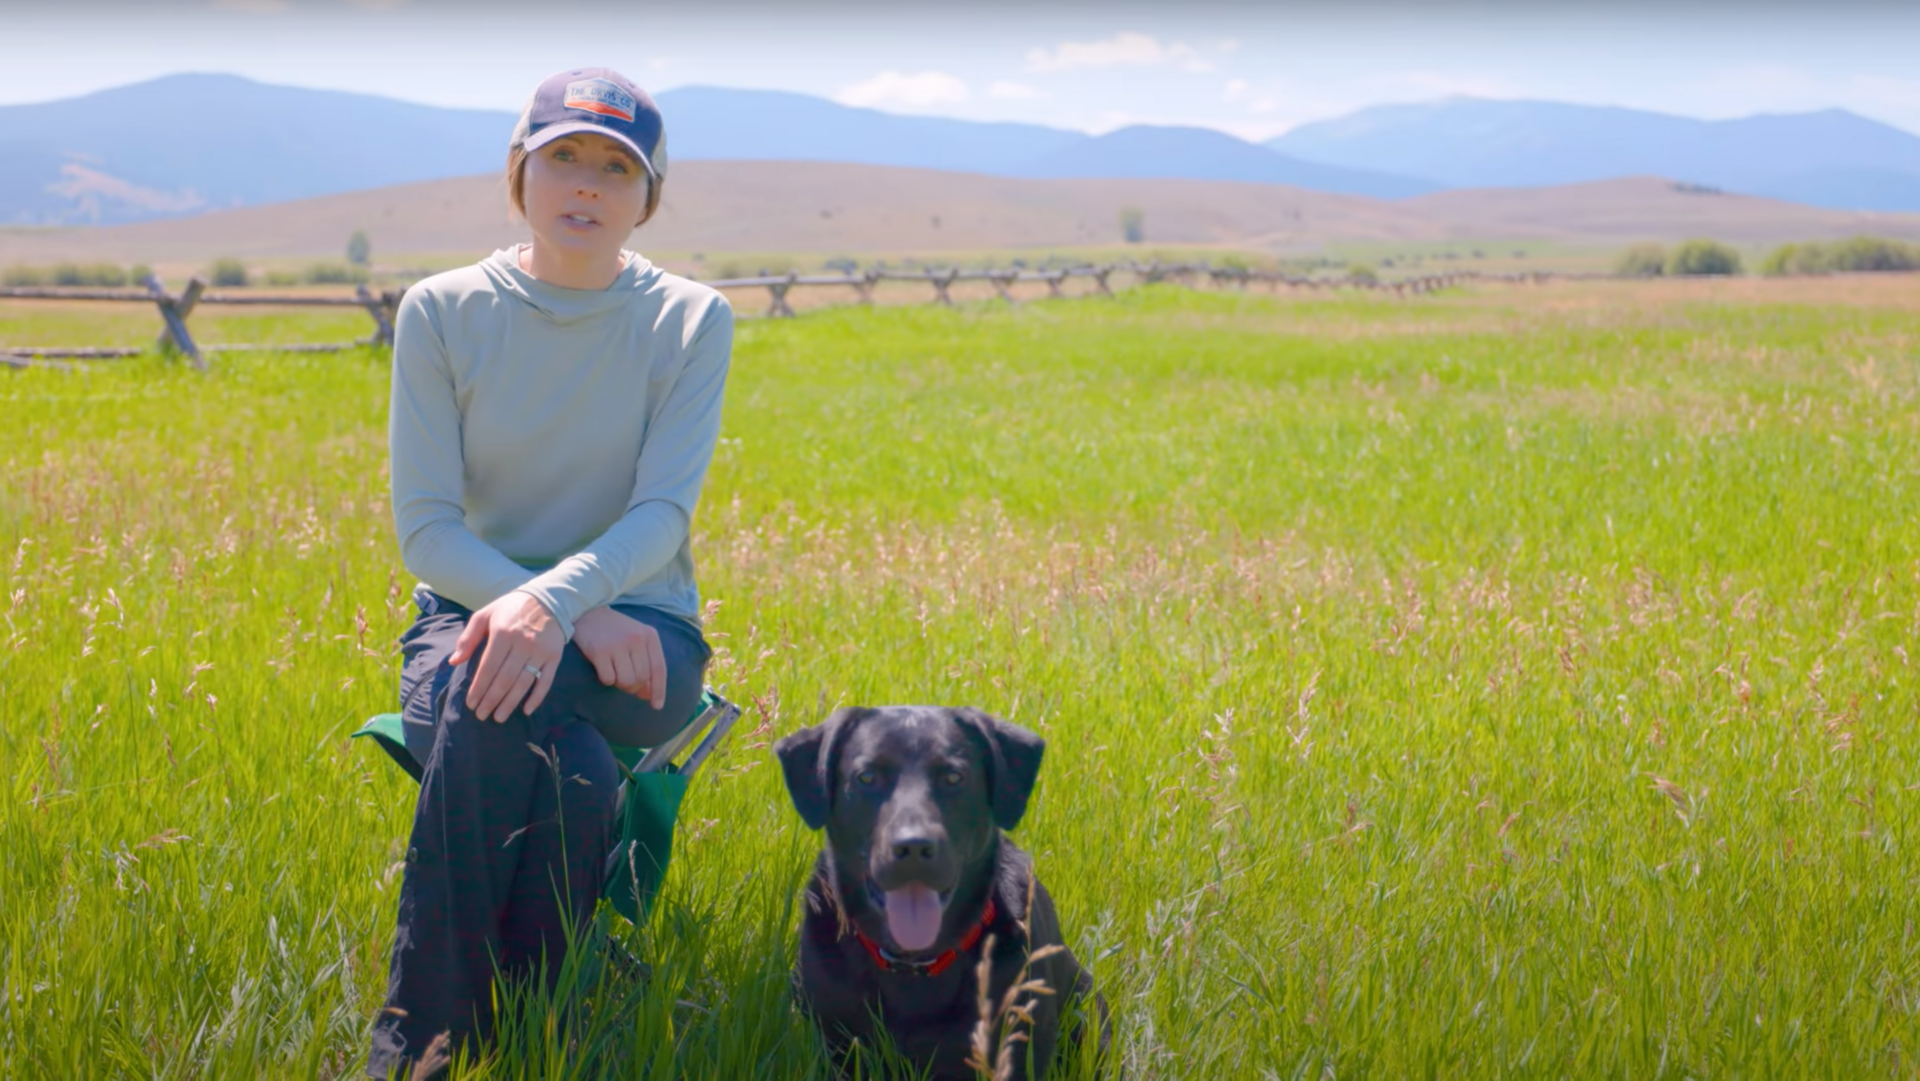 A woman and her panting dog sitting in the tall grass in an open field